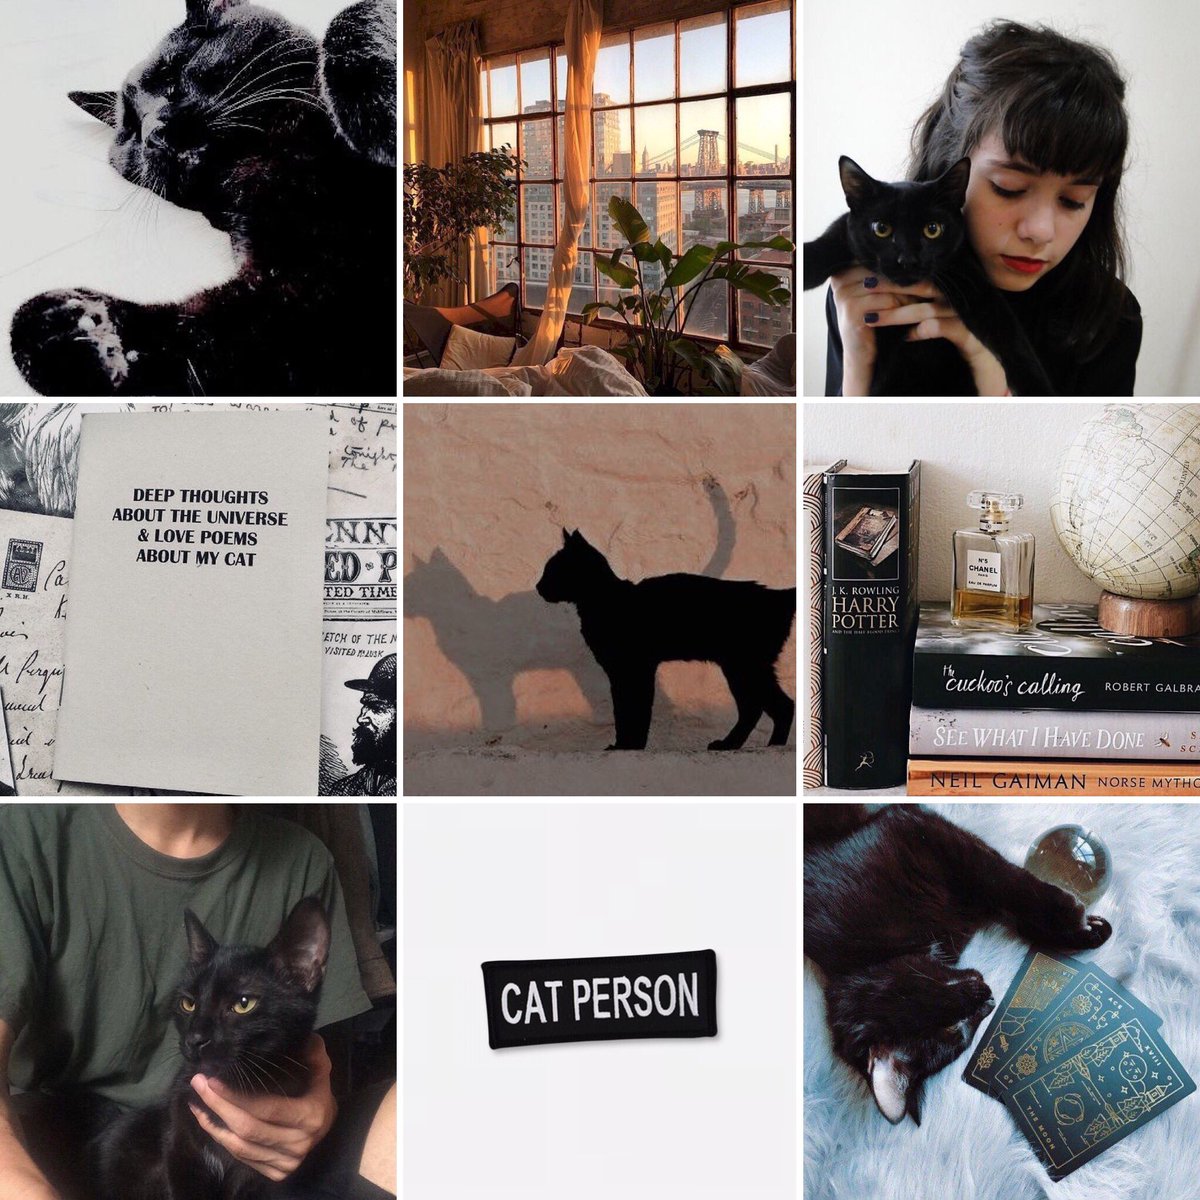 felis. she has it hard enough as a witch trying to fit in the normal world, but things would be a lot easier if her familiar didn’t suddenly find her downstairs neighbor to be the most interesting person in the world. but maybe, just maybe, there’s more to him than it seems